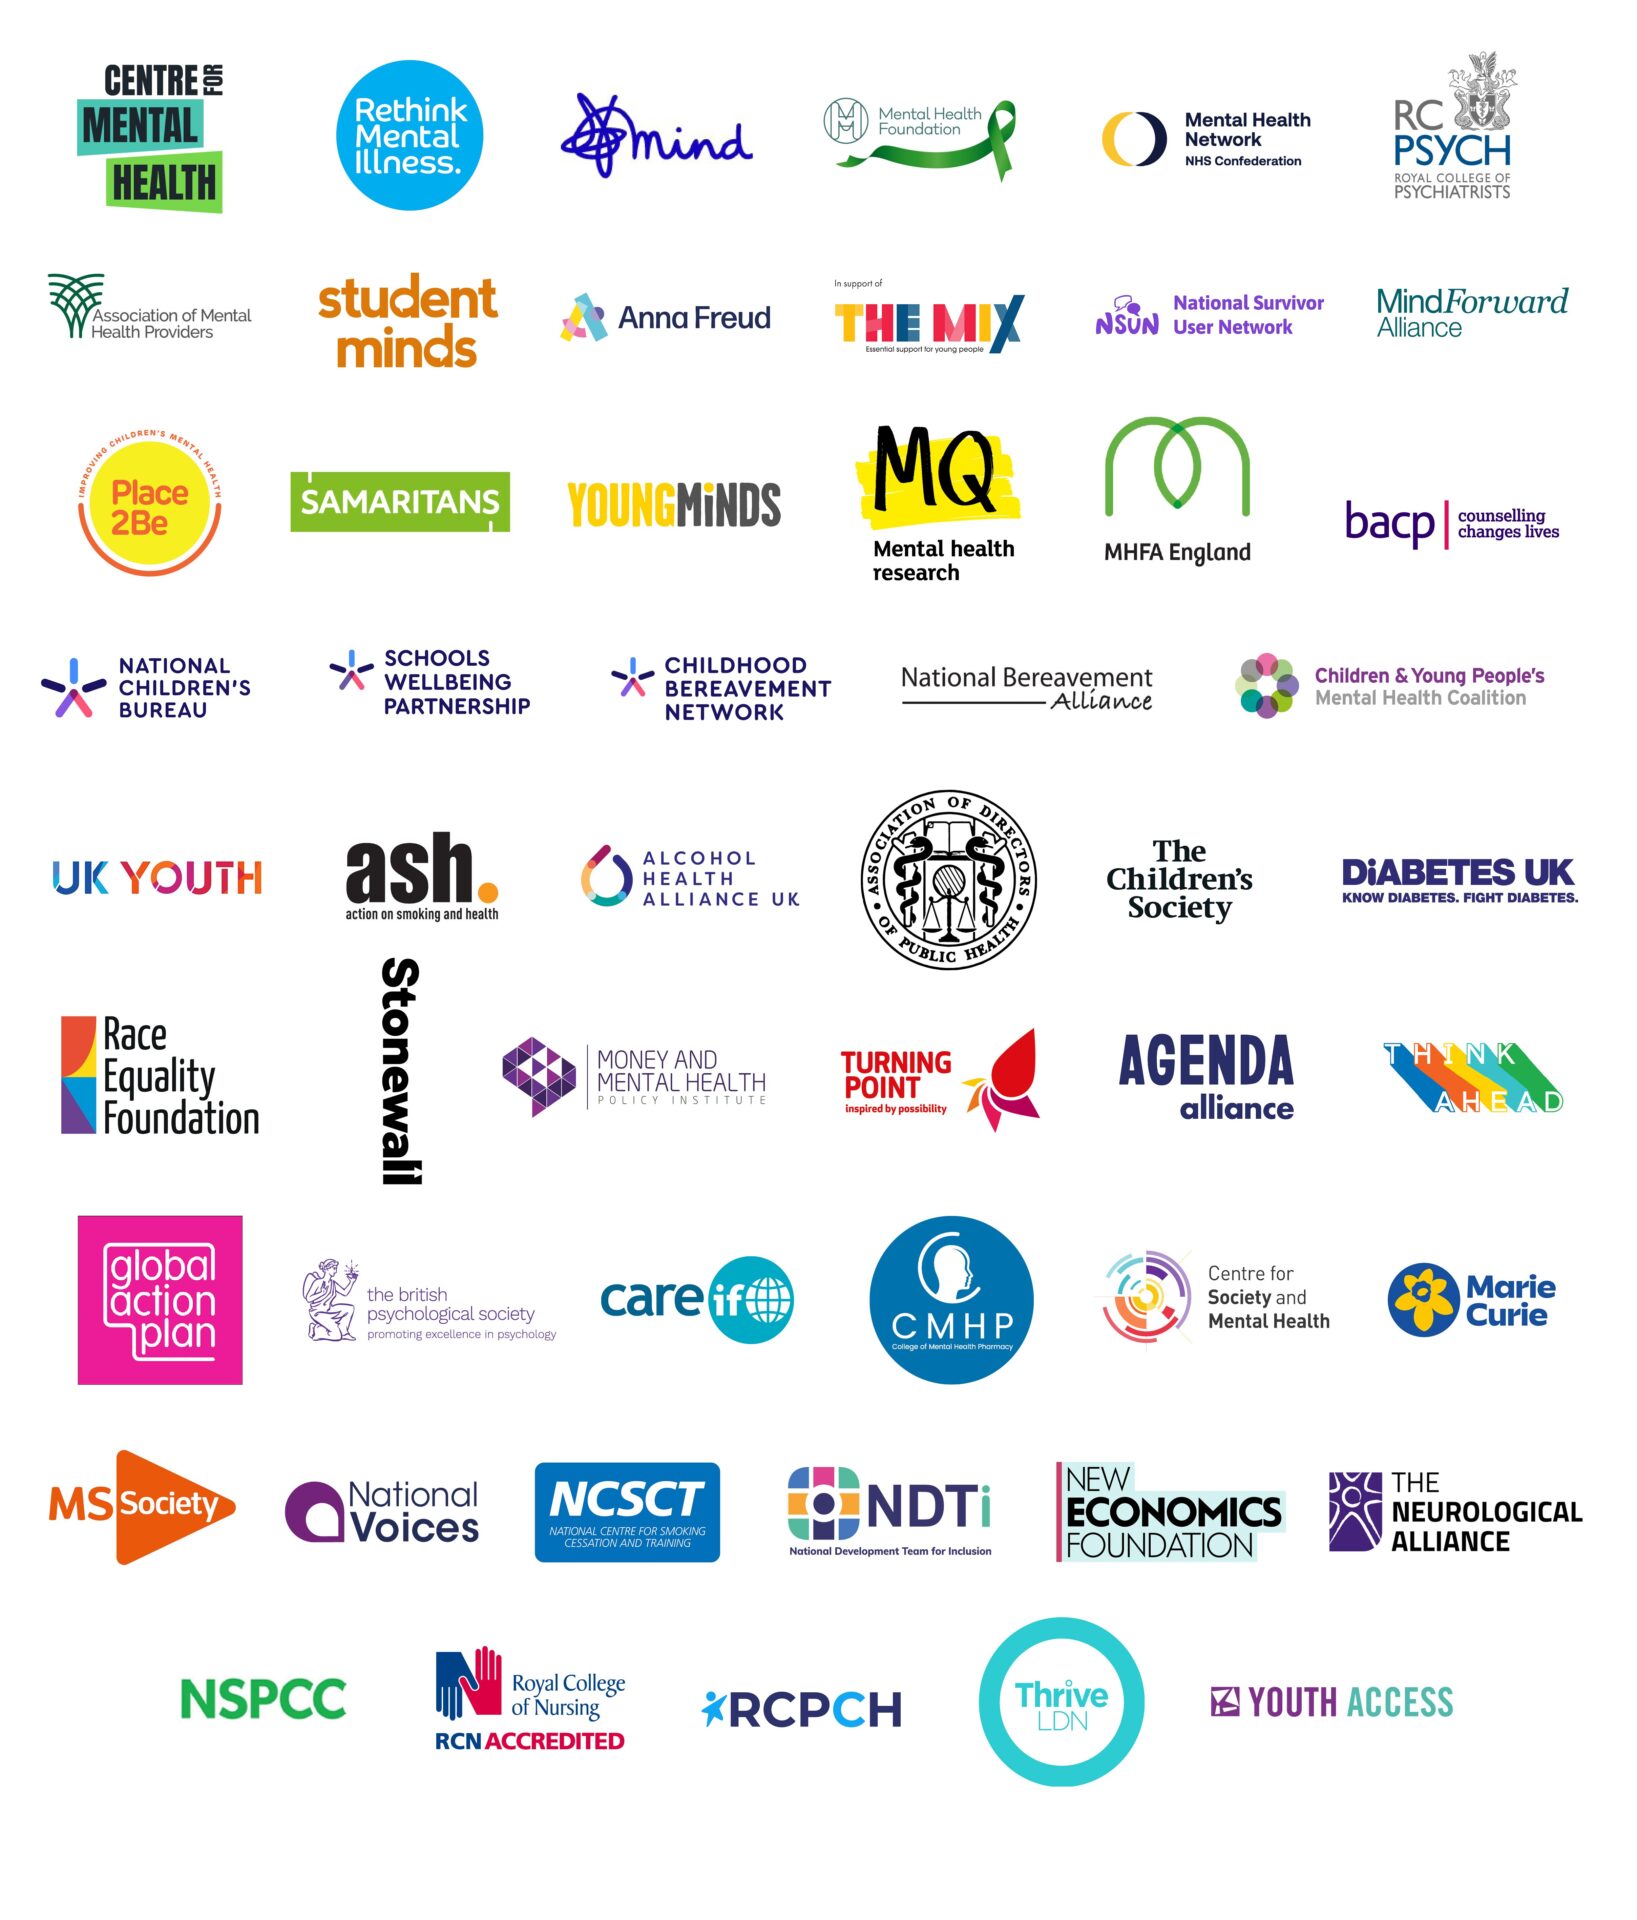 Logos of 52 organisations supporting A Mentally Healthier Nation: Centre for Mental Health, Mental Health Foundation, Mind, NHS Confederation’s Mental Health Network, Rethink Mental Illness, Royal College of Psychiatrists, Association of Mental Health Providers, Student Minds, Anna Freud Centre, The Mix, National Survivor User Network, Mind Forward Alliance, Place2Be, Samaritans, YoungMinds, MQ Mental Health Network, MHFA England, BACP, National Children's Bureau, Schools Wellbeing Partnership, Childhood Bereavement Network, National Bereavement Alliance, Children & Young People's Mental Health Coalition, UK Youth, ASH, Alcohol Health Alliance UK, Association of Directors of Public Health, The Children's Society, Diabetes UK, Race Equality Foundation, Stonewall, Money & Mental Health Policy Institute, Turning Point, Agenda Alliance, Think Ahead, Global Action Plan, BPS, CareIf, CMHP, Centre for Society & Mental Health, Marie Curie, MS Society, National Voices, NCSCT, NDTI, New Economics Foundation, The Neurological Alliance, NSPCC, Royal College of Nursing, RCPCH, Thrive LDN & Youth Access